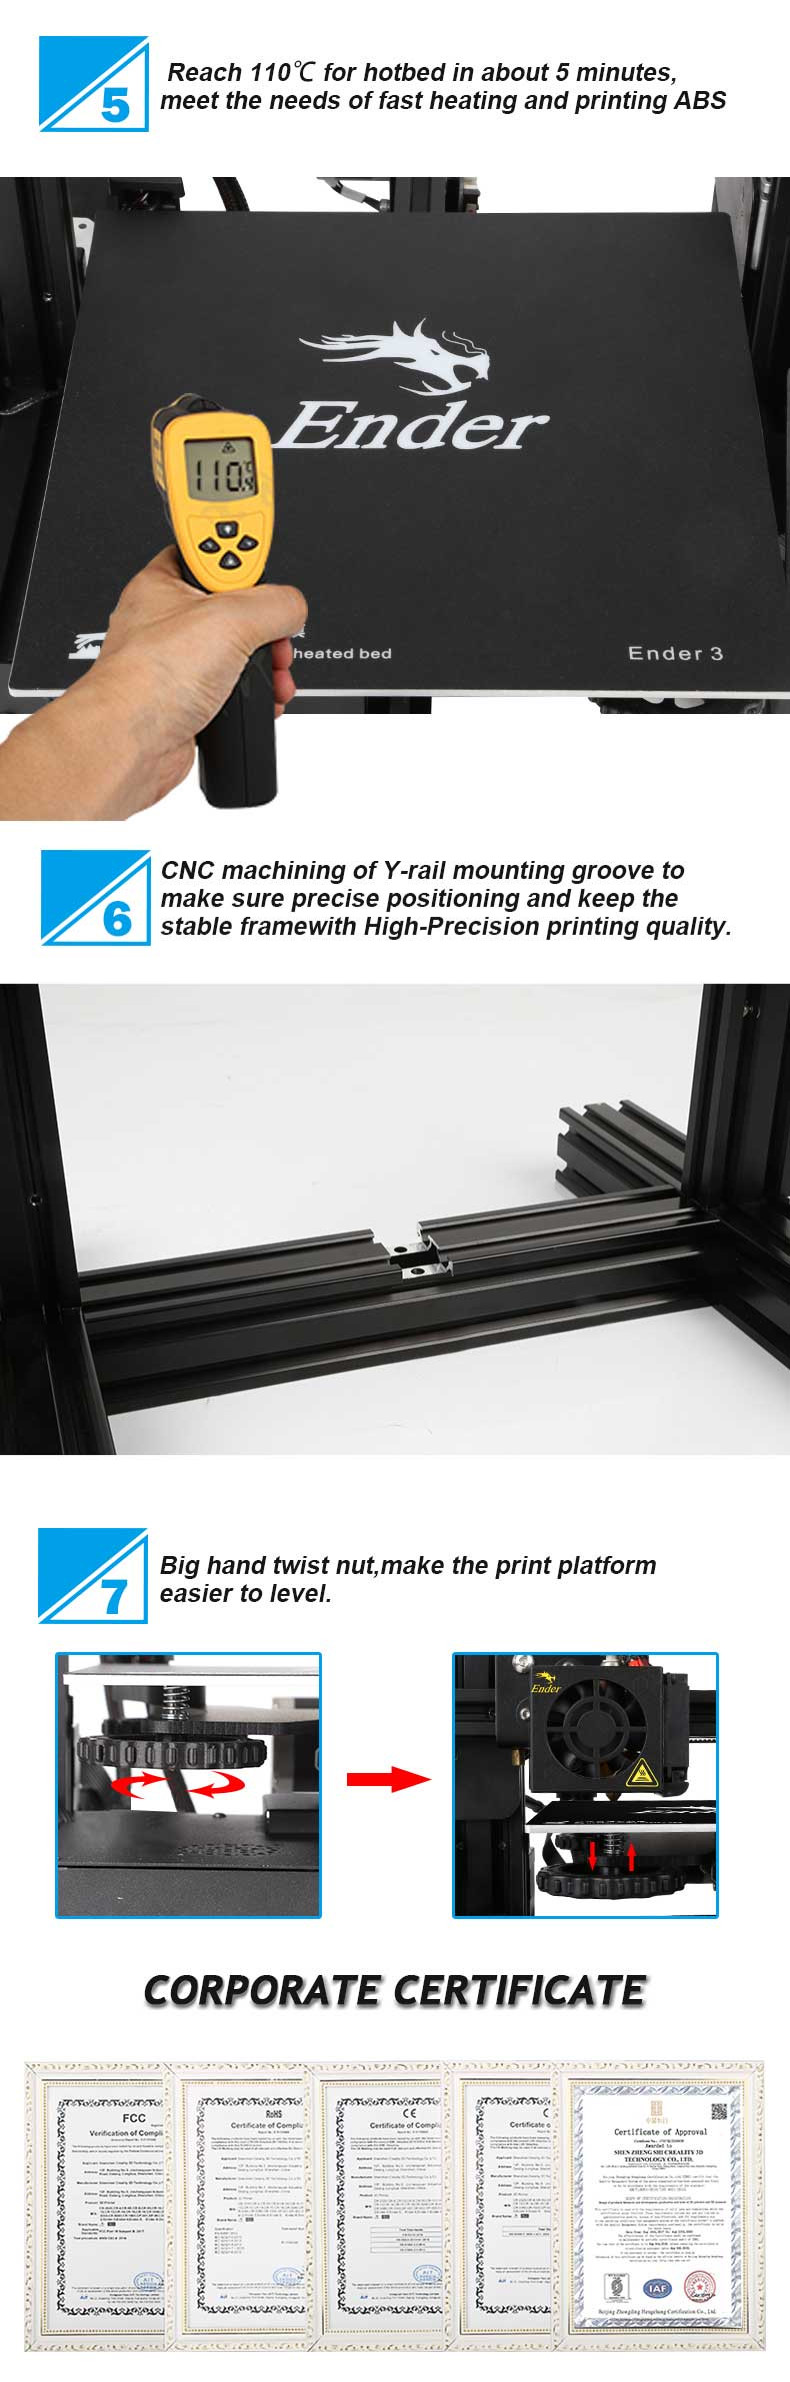 Creality 3D® Ender-3 V-slot Prusa I3 DIY 3D Printer Kit 220x220x250mm Printing Size With Power Resume Function/MK10 Extruder 1.75mm 0.4mm Nozzle 6